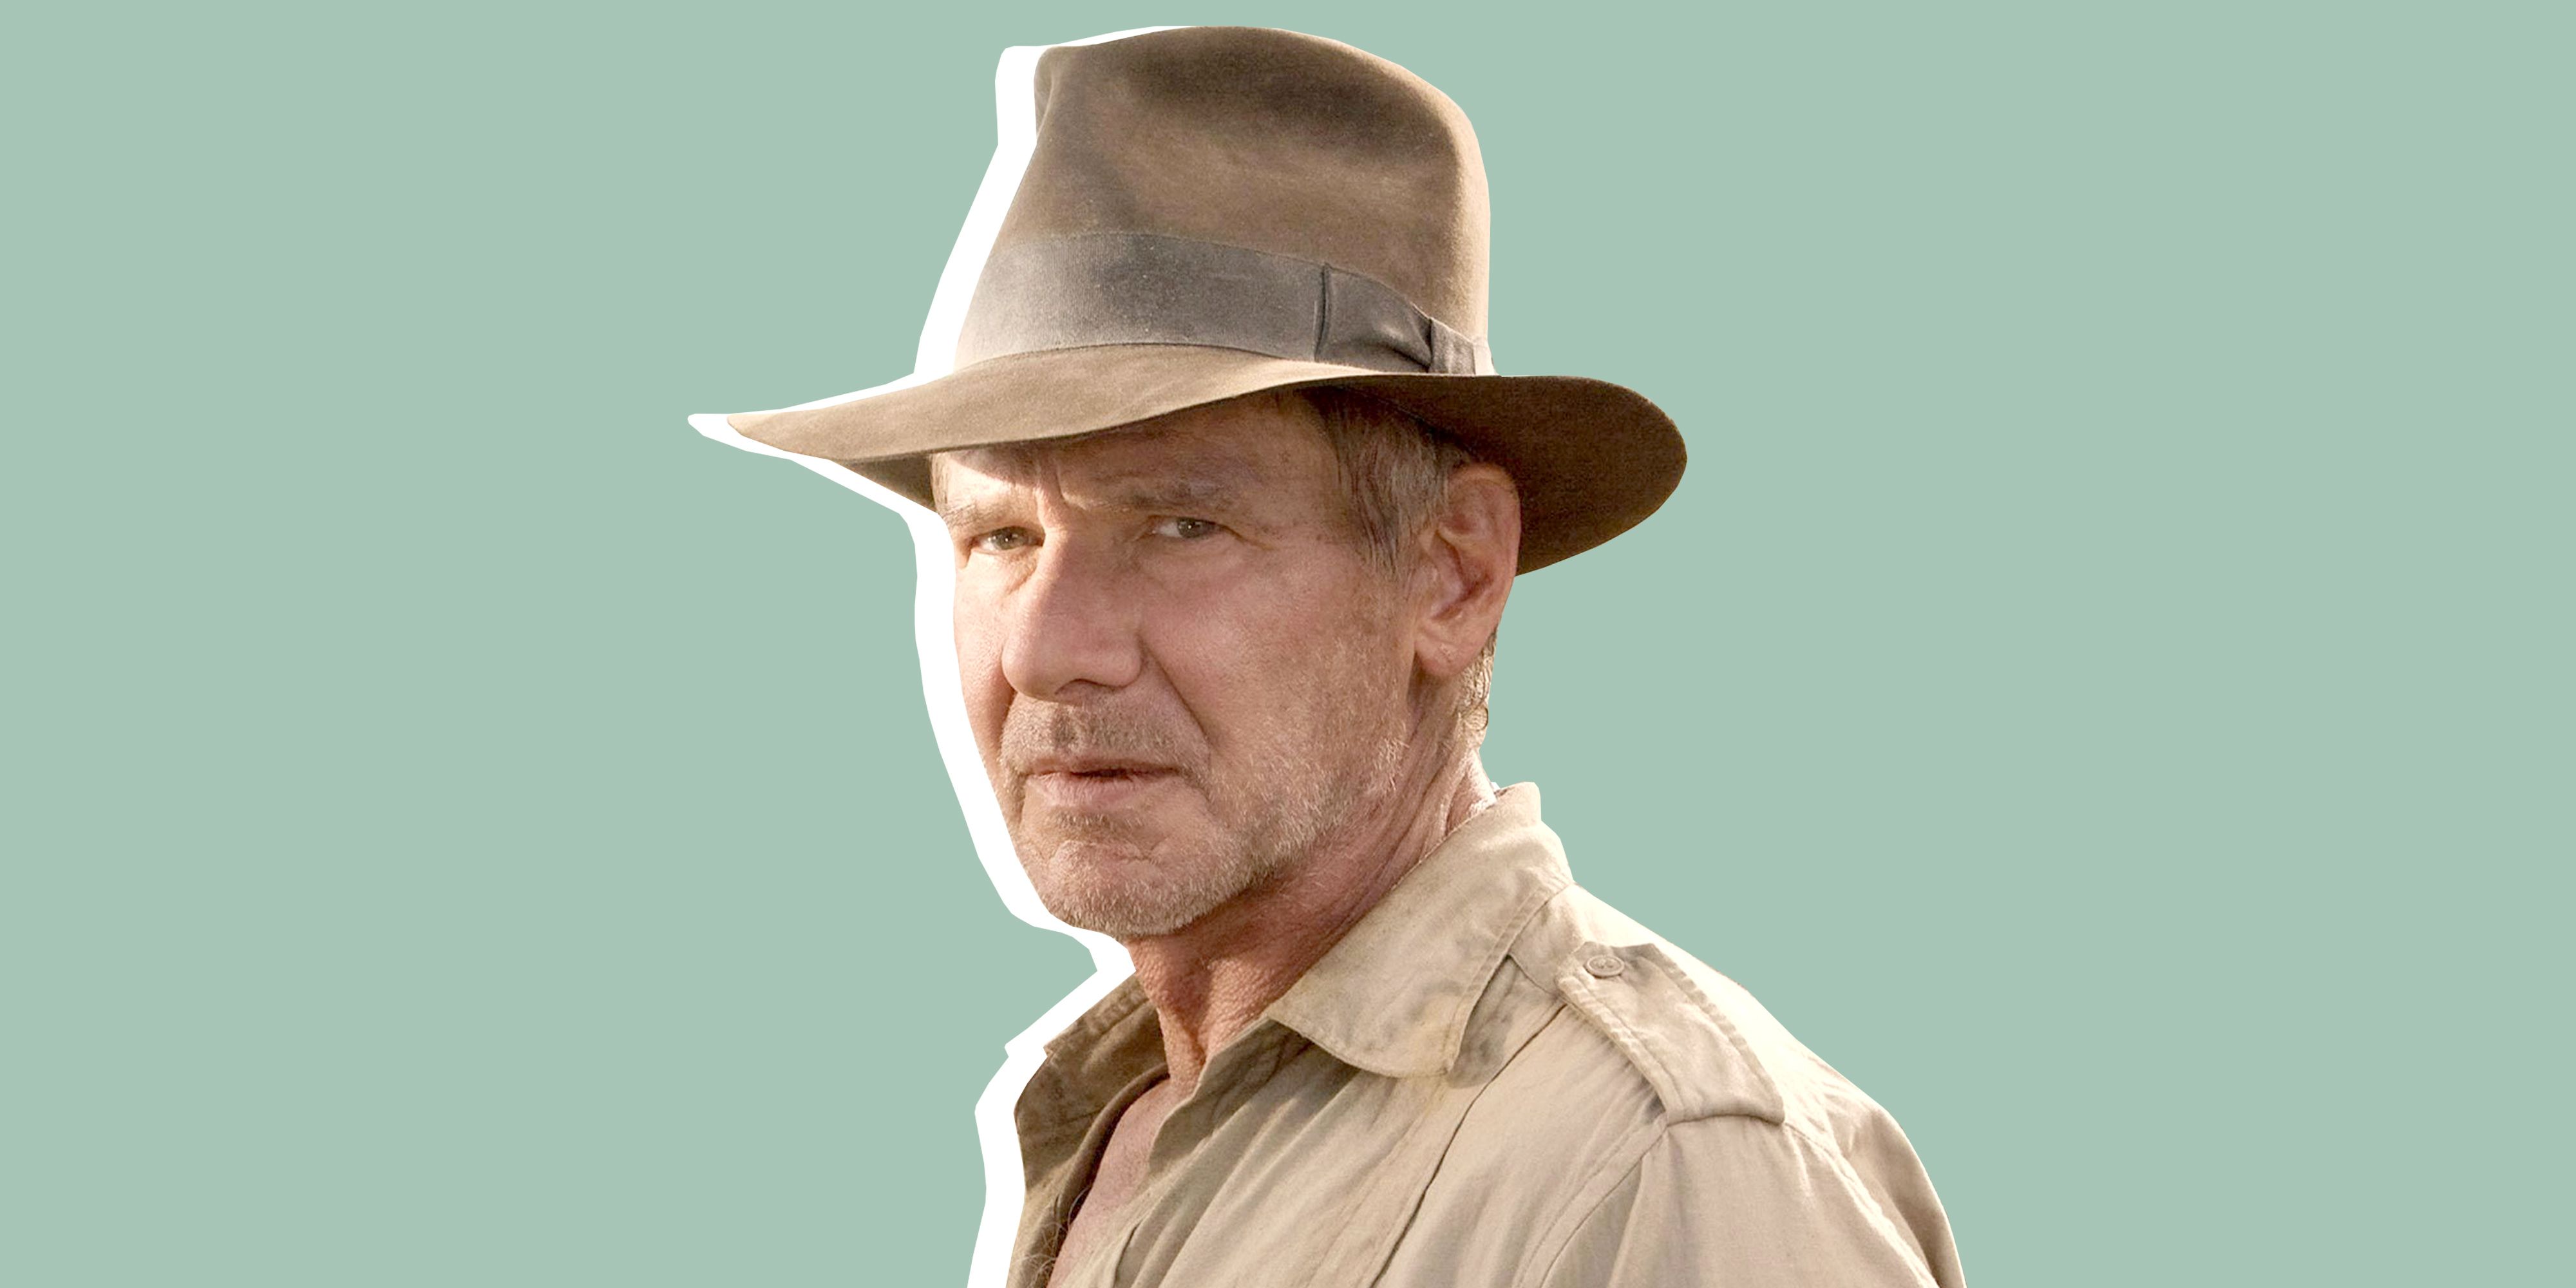 Indiana Jones 5: All you need to know